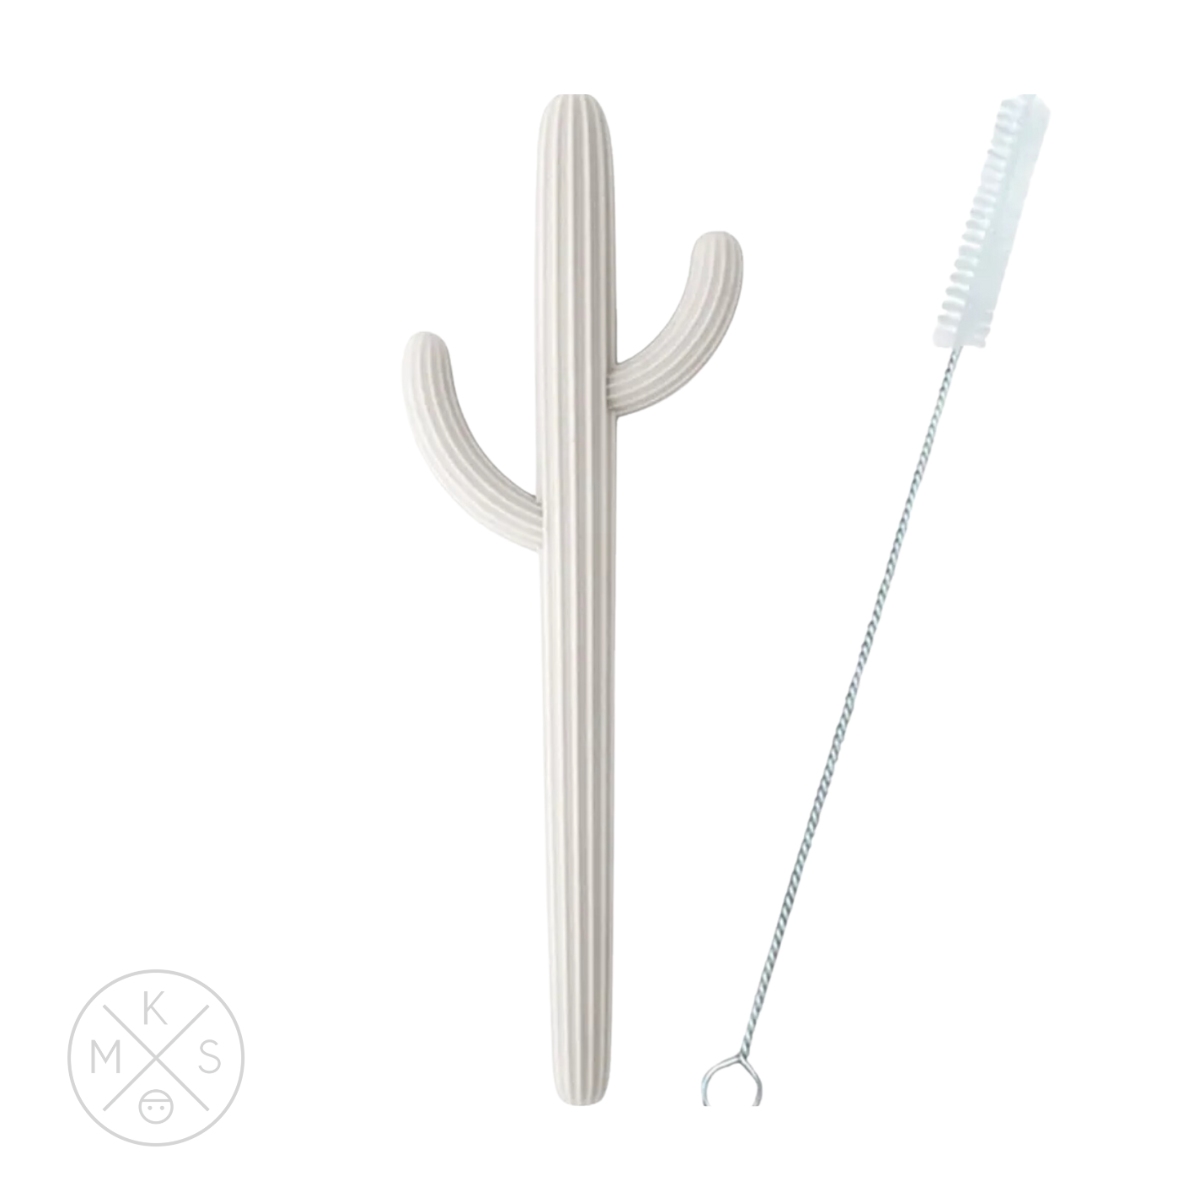 Cactus Silicone Teether & Straw for kids and adults